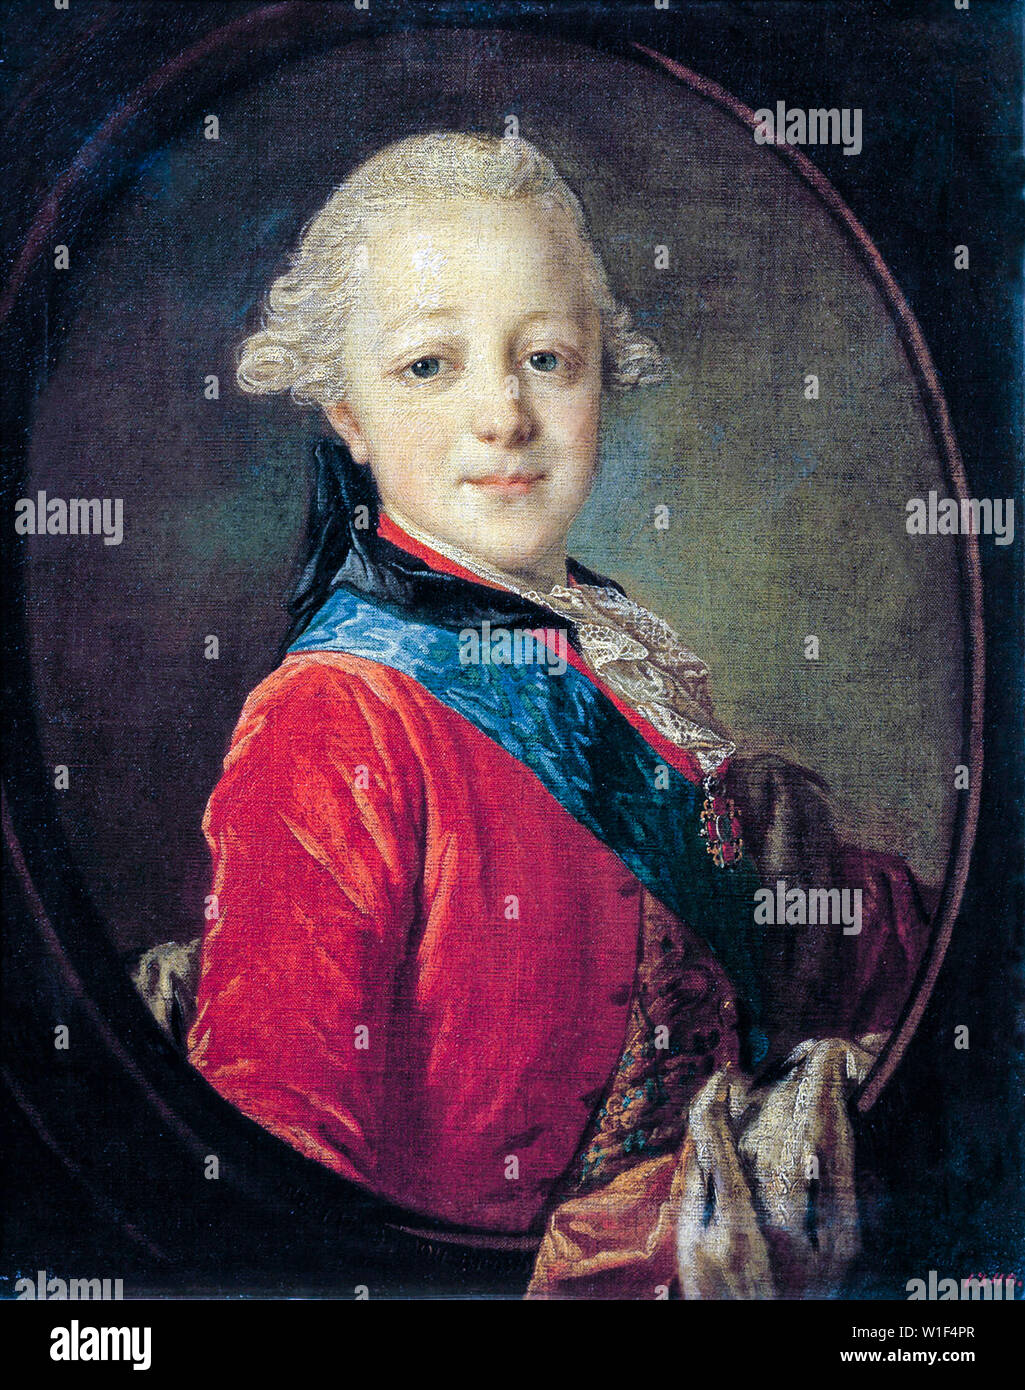 Emperor Paul I of Russia (1754-1801) as a child, portrait painting by Fyodor Rokotov, 1761 Stock Photo